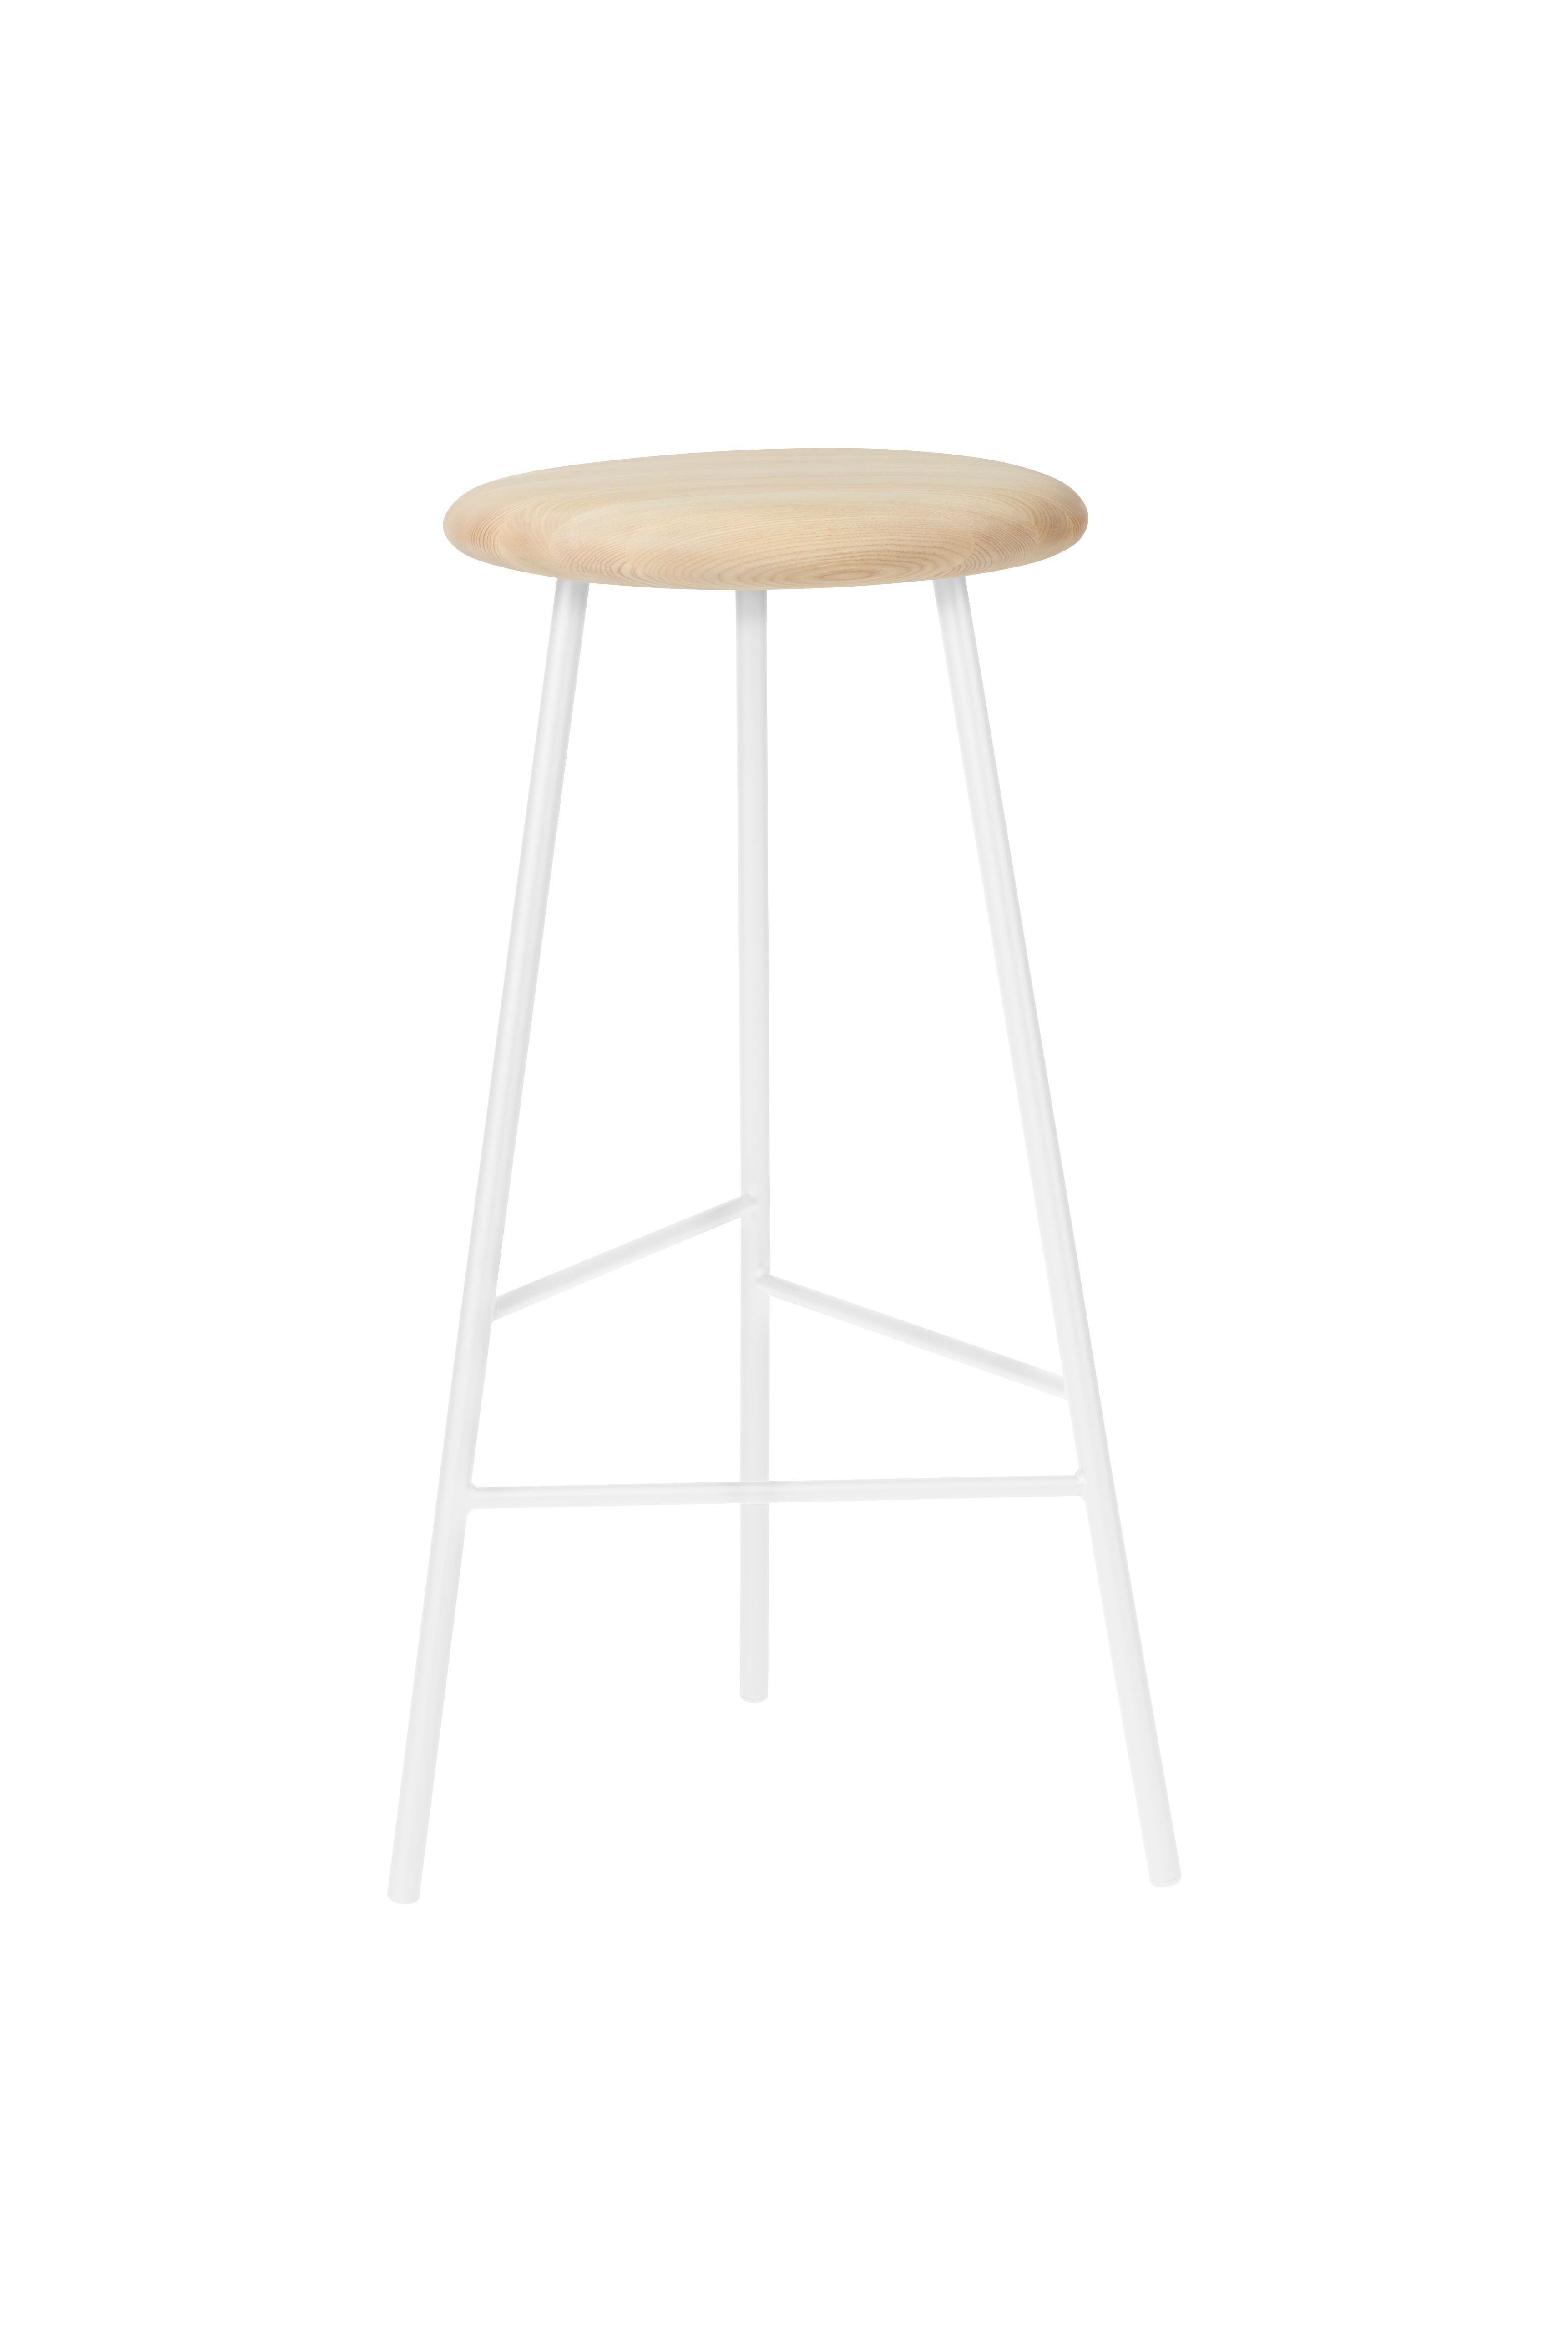 For Sale: White (Ash/White) Pebble Bar Stool, by Welling / Ludvik from Warm Nordic